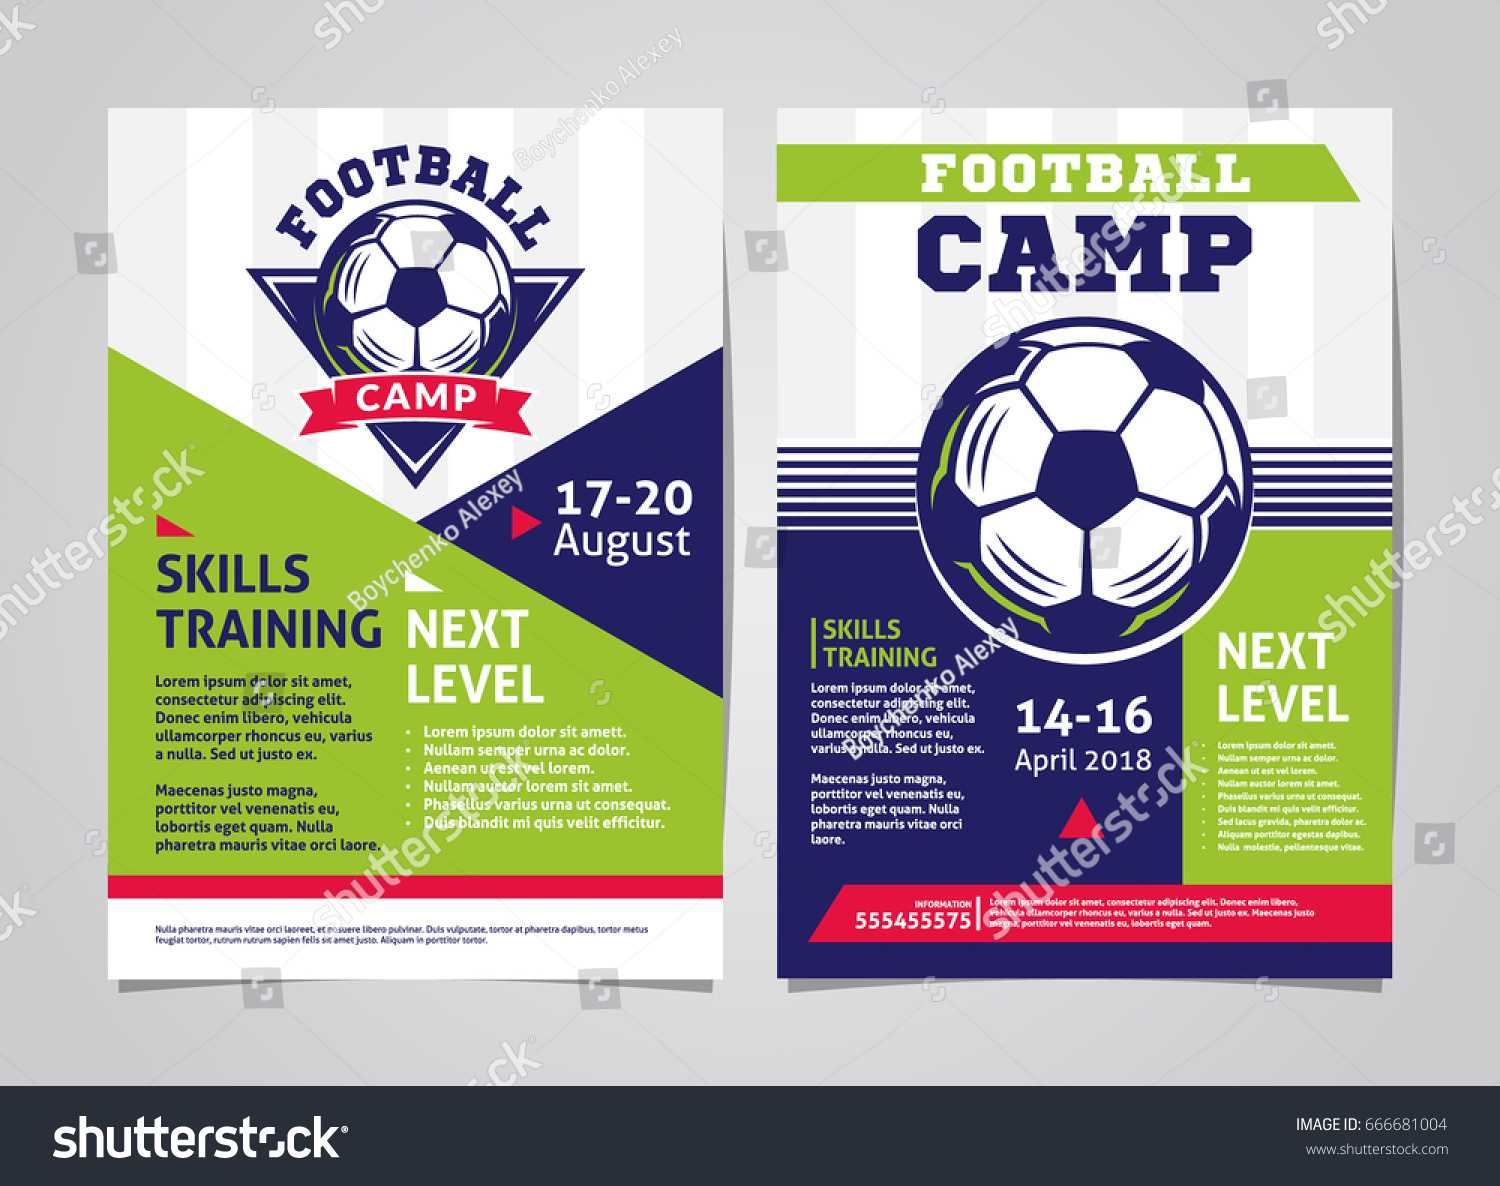 Football Soccer Camp Posters Flyer Football Stock Vector In Football Camp Flyer Template